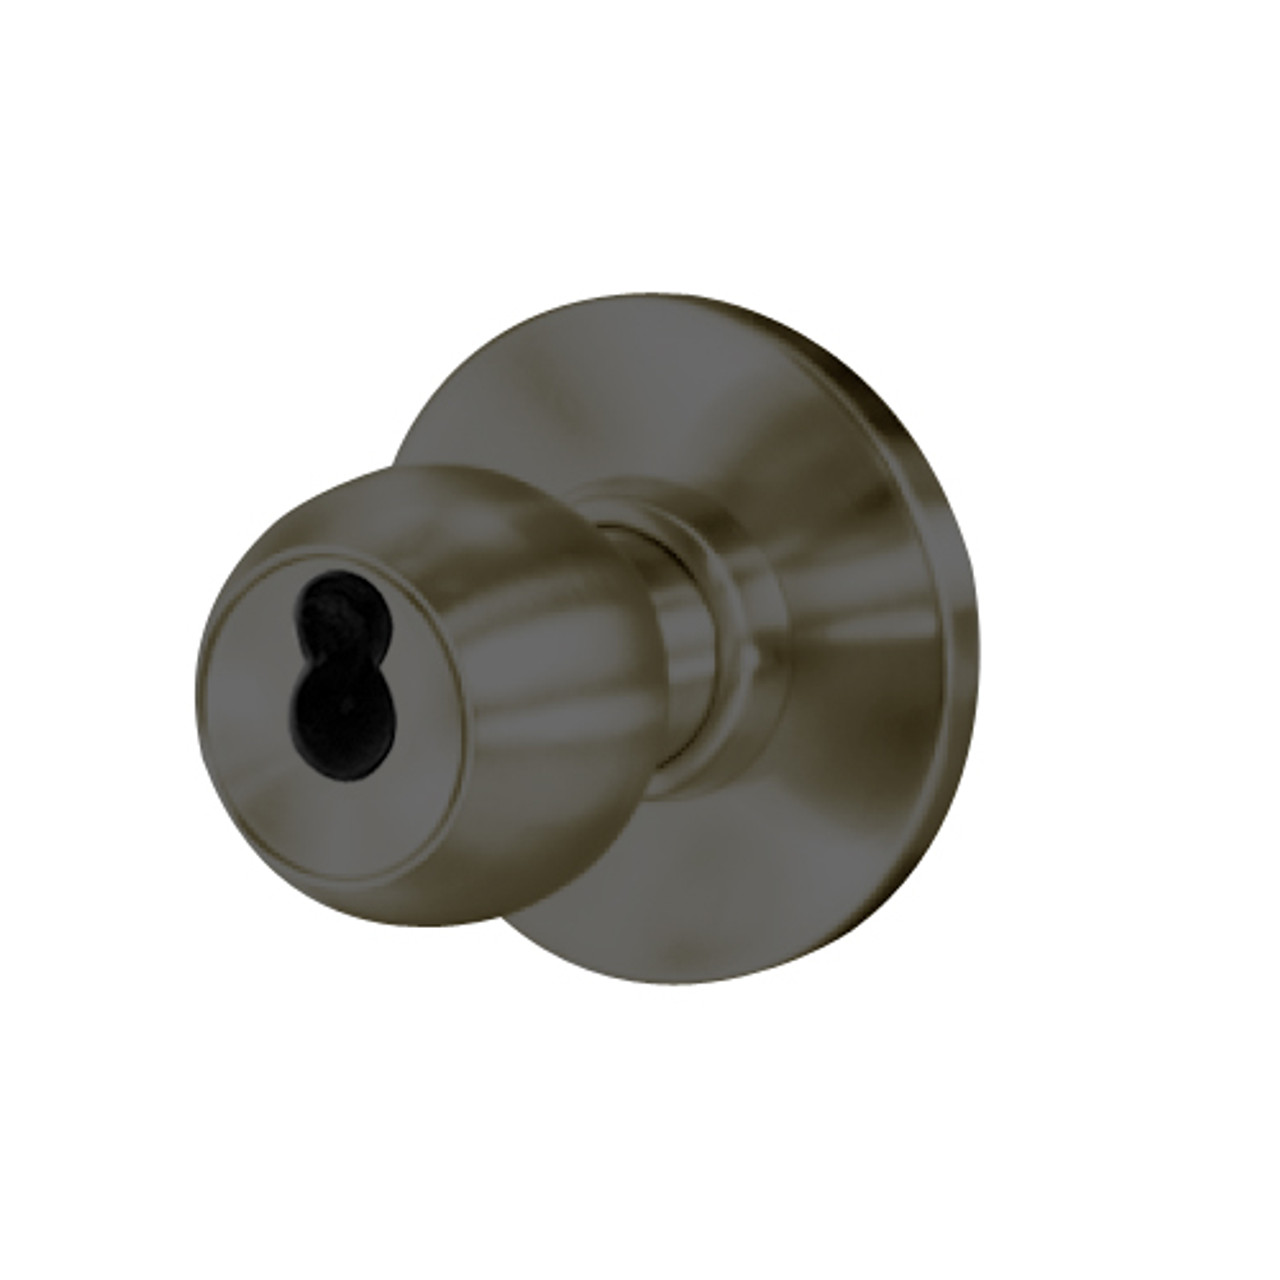 8K47YD4ASTK613 Best 8K Series Exit Heavy Duty Cylindrical Knob Locks with Round Style in Oil Rubbed Bronze